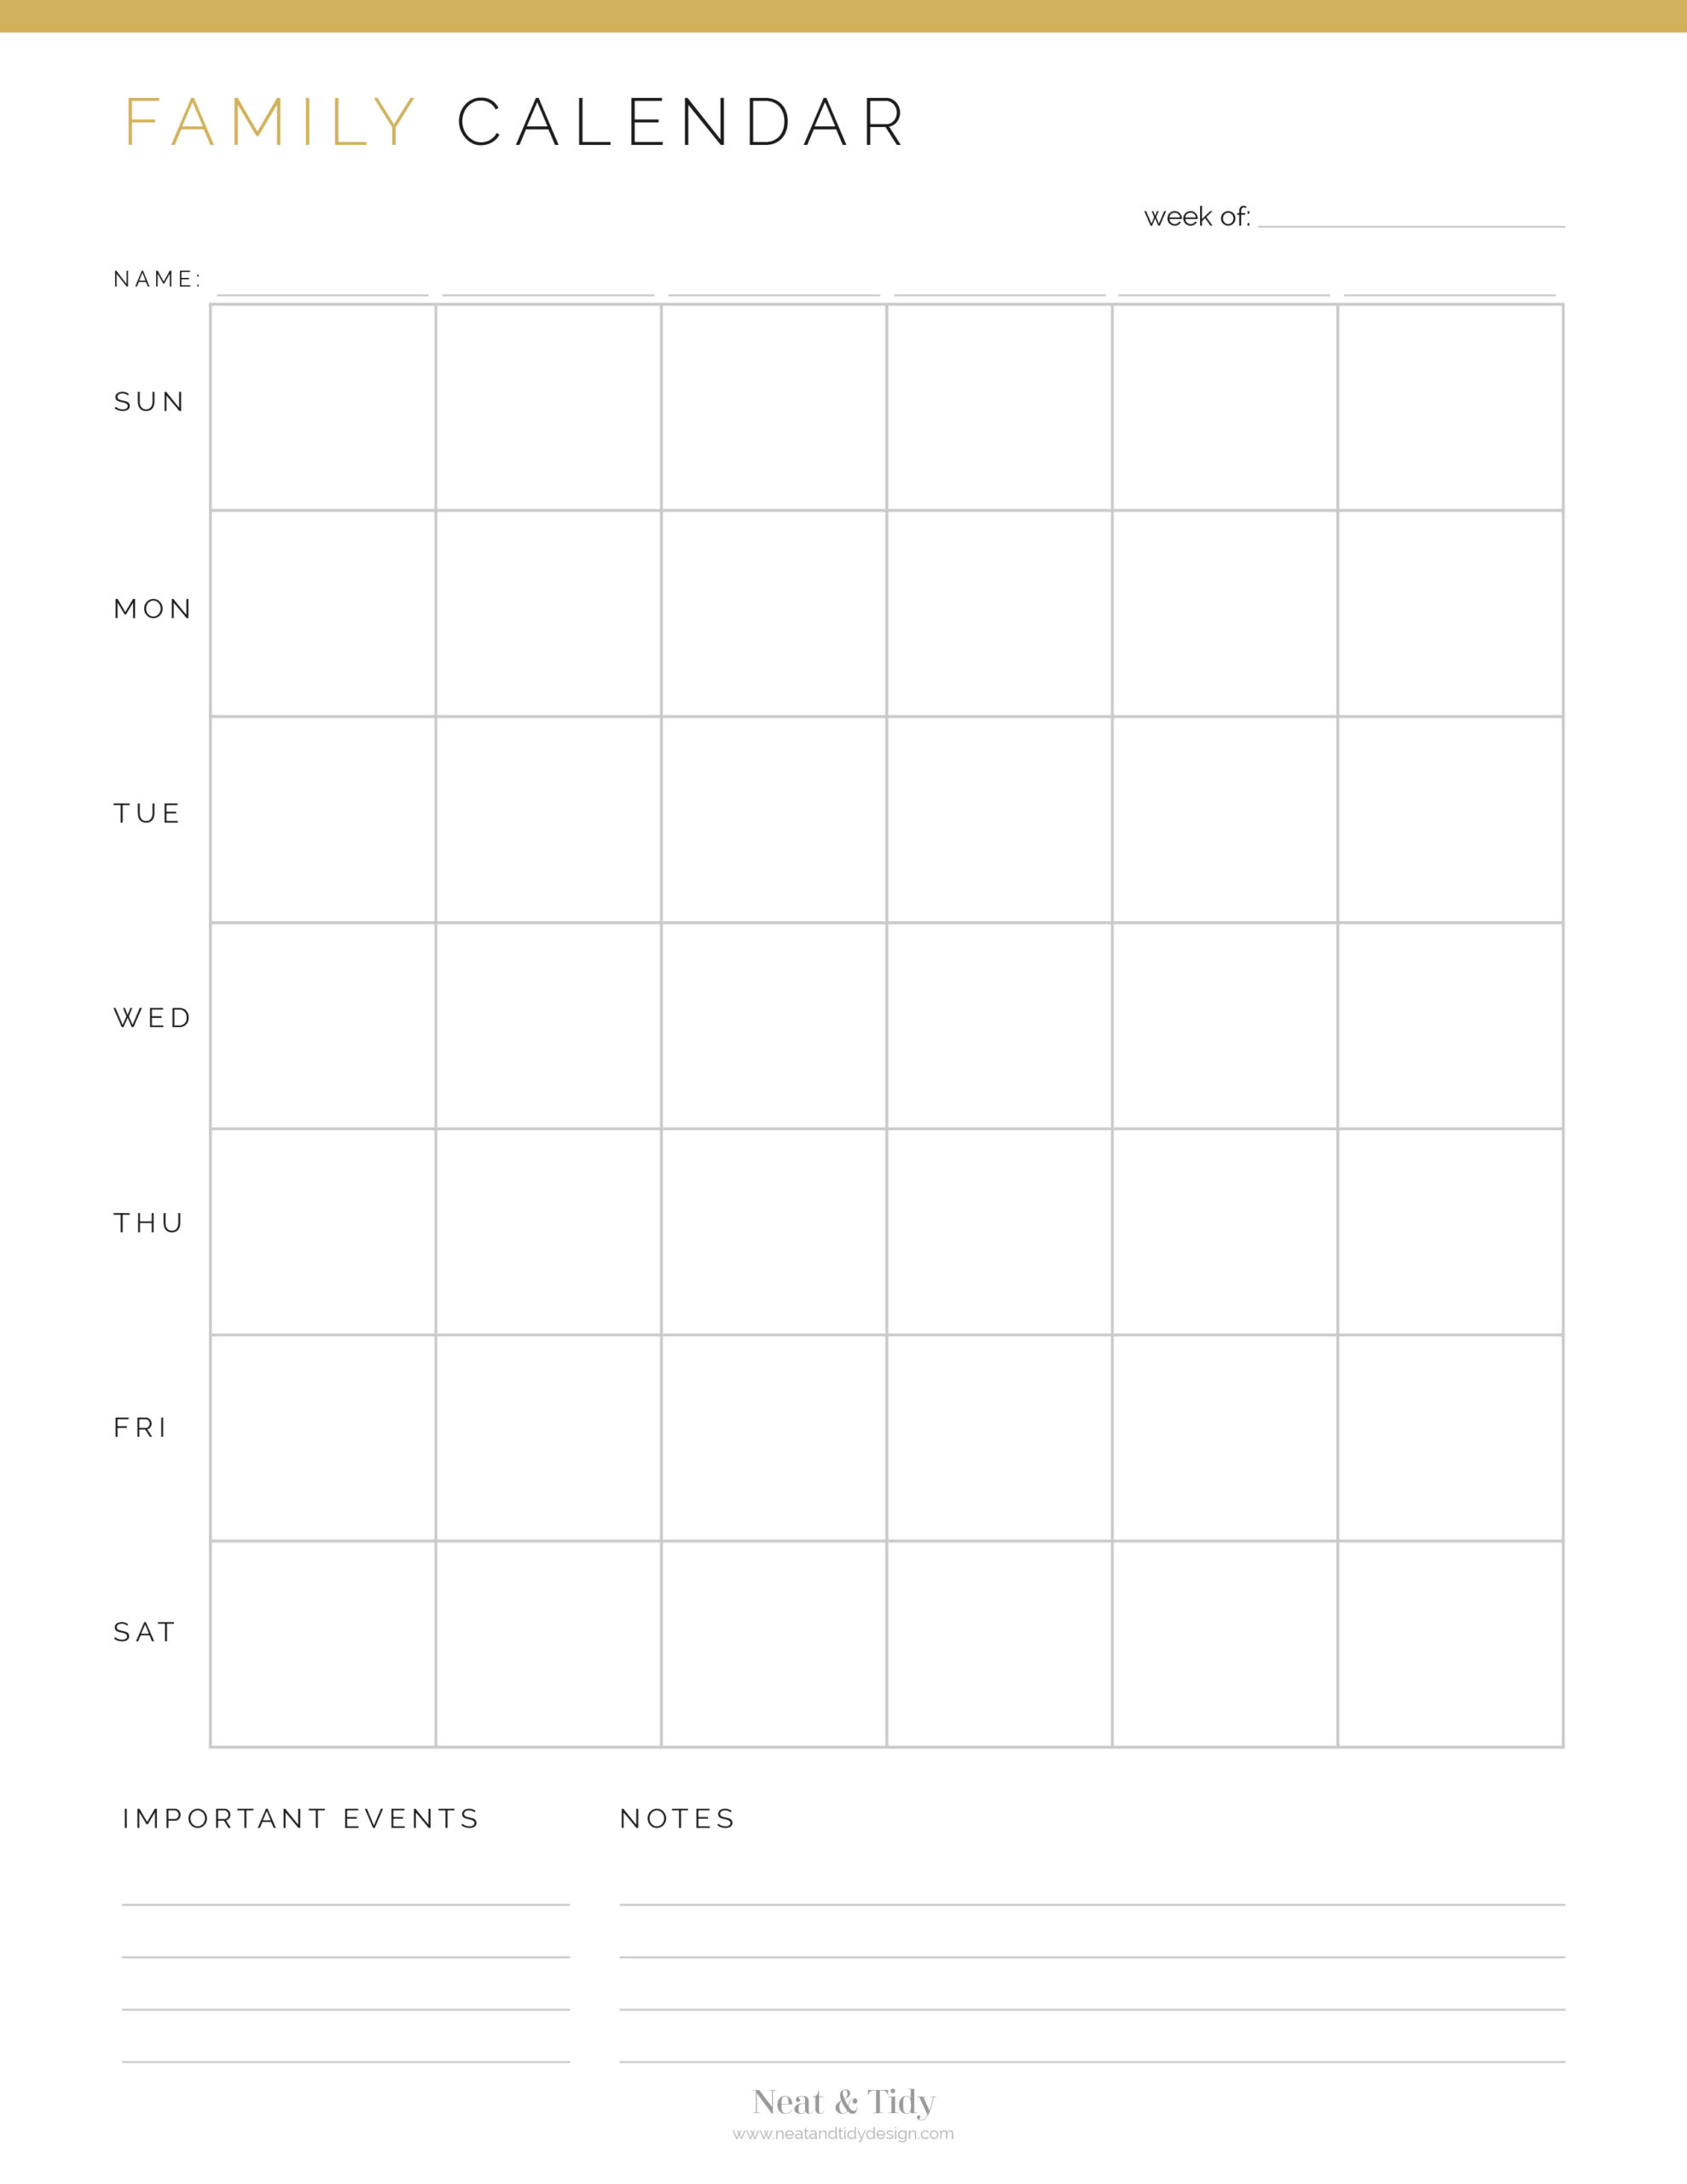 Weekly Family Calendar Neat and Tidy Design